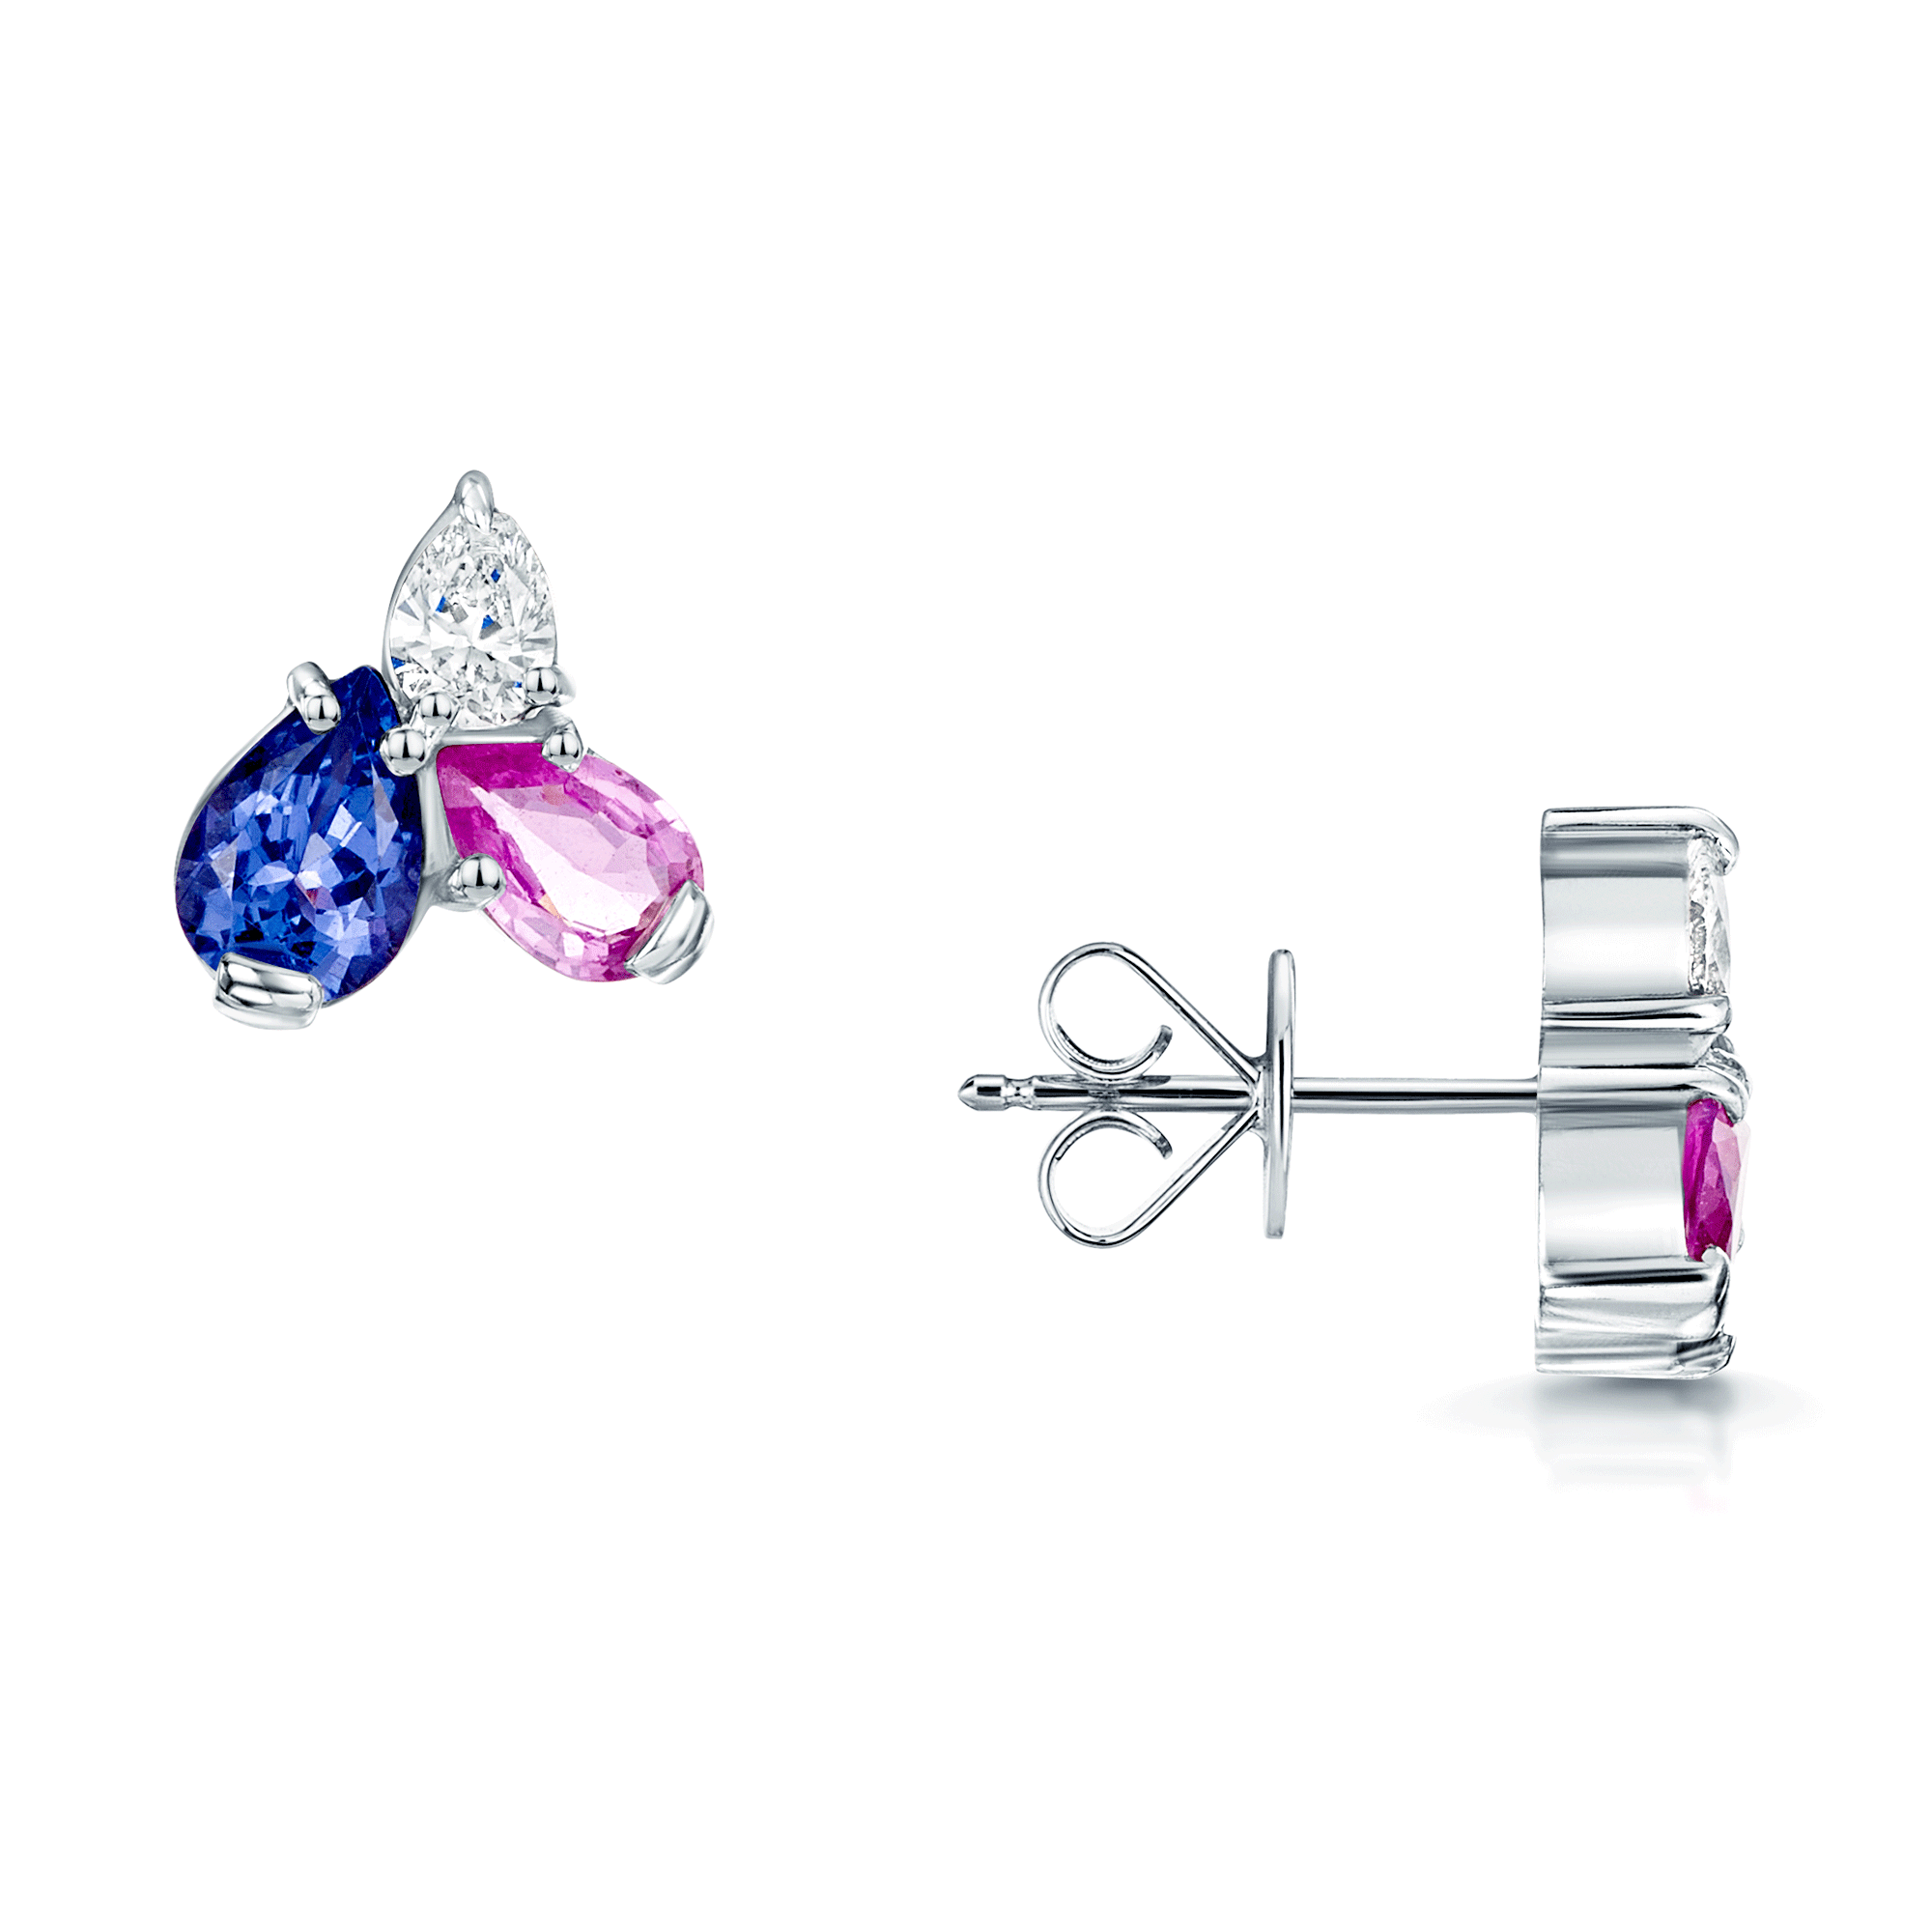 18ct White Gold Pear Cut Diamond, Pink Sapphire And Tanzanite Cluster Earrings